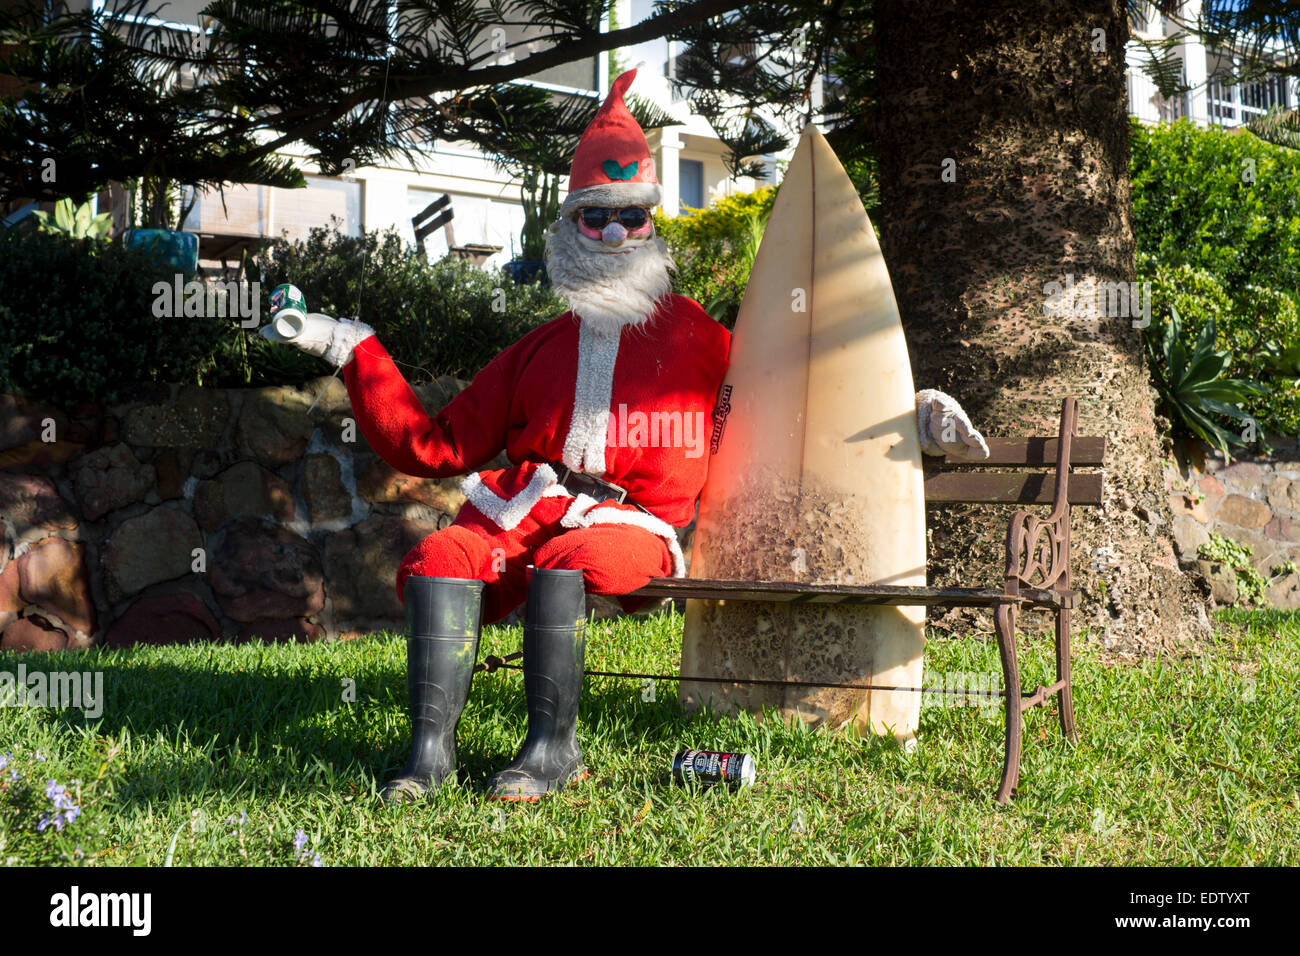 Surfer Santa Claus Surfing Surfie Santa Claus model sitting on garden bench holding surfboard holding can of beer NSW Australia Stock Photo